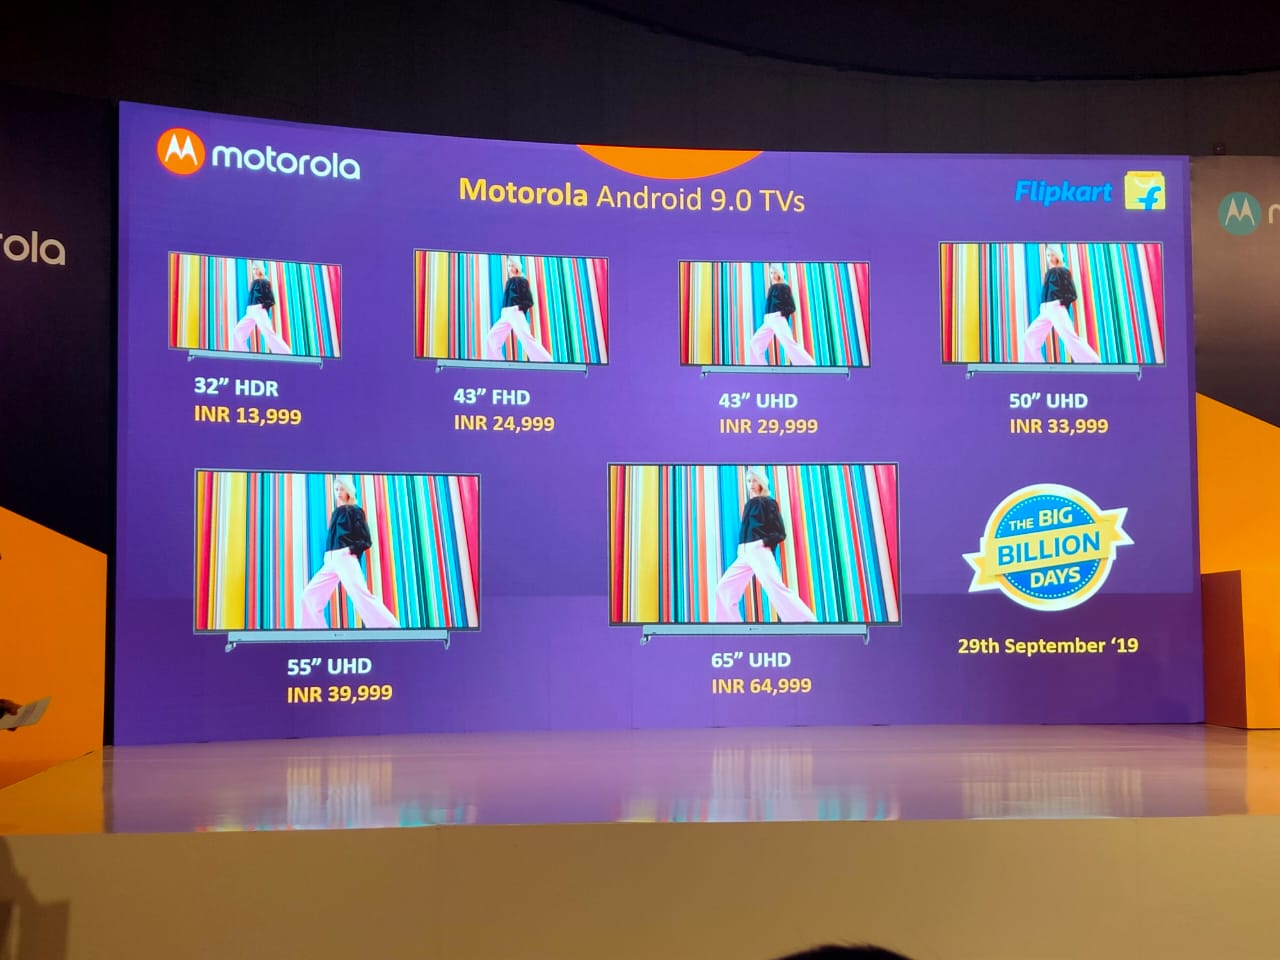 Motorola Android Smart TV Models Harga India "width =" 1280 "height =" 960 "srcset =" https://assets.mspimages.in/wp-content/uploads/2019/09/Motorola-Android-Smart-TV-Models -Harga-India.jpeg 1280w, https://assets.mspimages.in/wp-content/uploads/2019/09/Motorola-Android-Smart-TV-Models-Price-India-300x225.jpeg 300w, https: / /assets.mspimages.in/wp-content/uploads/2019/09/Motorola-Android-Smart-TV-Models-Price-India-768x576.jpeg 768w, https://assets.mspimages.in/wp-content/ uploads / 2019/09 / Motorola-Android-Smart-TV-Models-Price-India-1024x768.jpeg 1024w, https://assets.mspimages.in/wp-content/uploads/2019/09/Motorola-Android-Smart -TV-Models-Price-India-80x60.jpeg 80w, https://assets.mspimages.in/wp-content/uploads/2019/09/Motorola-Android-Smart-TV-Models-Price-India-265x198. jpeg 265w, https://assets.mspimages.in/wp-content/uploads/2019/09/Motorola-Android-Smart-TV-Models-Price-India-696x522.jpeg 696w, https: //assets.mspimages. di / wp-content / unggahan / 2019/09 / Motorola-Android-Smart-TV-Models-Price-I ndia-1068x801.jpeg 1068w, https://assets.mspimages.in/wp-content/uploads/2019/09/Motorola-Android-Smart-TV-Models-Price-India-560x420.jpeg 560w, https: // assets.mspimages.in/wp-content/uploads/2019/09/Motorola-Android-Smart-TV-Models-Price-India-50x38.jpeg 50w "ukuran =" (lebar maks: 1280px) 100vw, 1280px